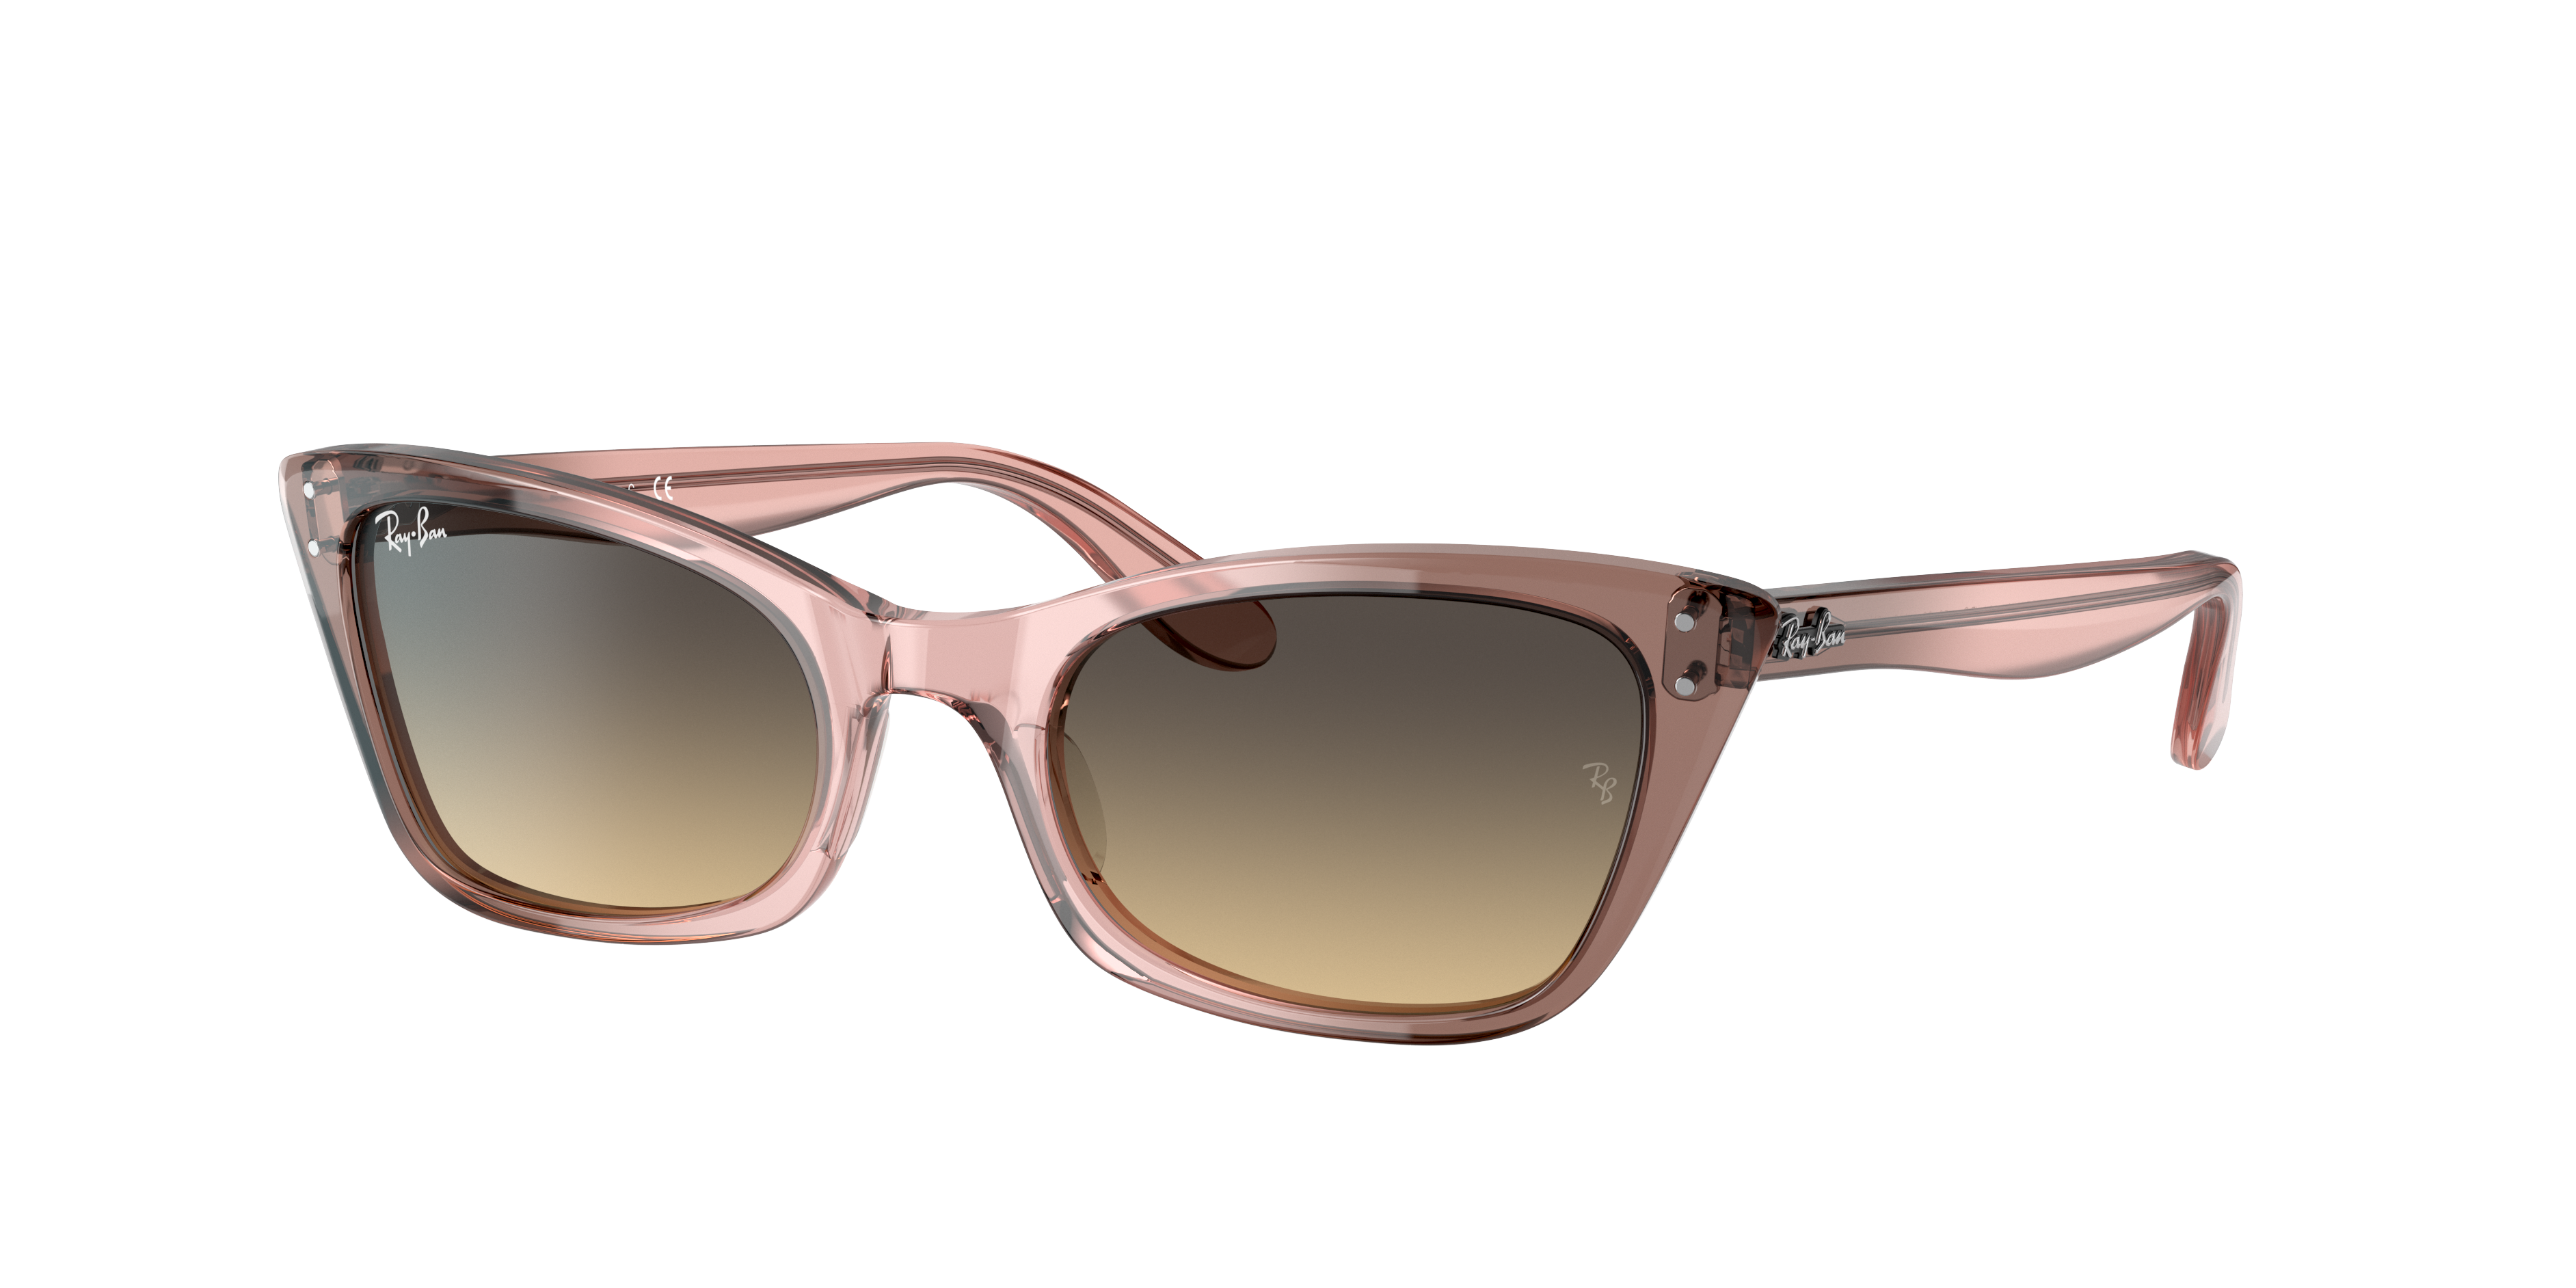 Lady Burbank Sunglasses in Transparent Pink and Brown | Ray-Ban®